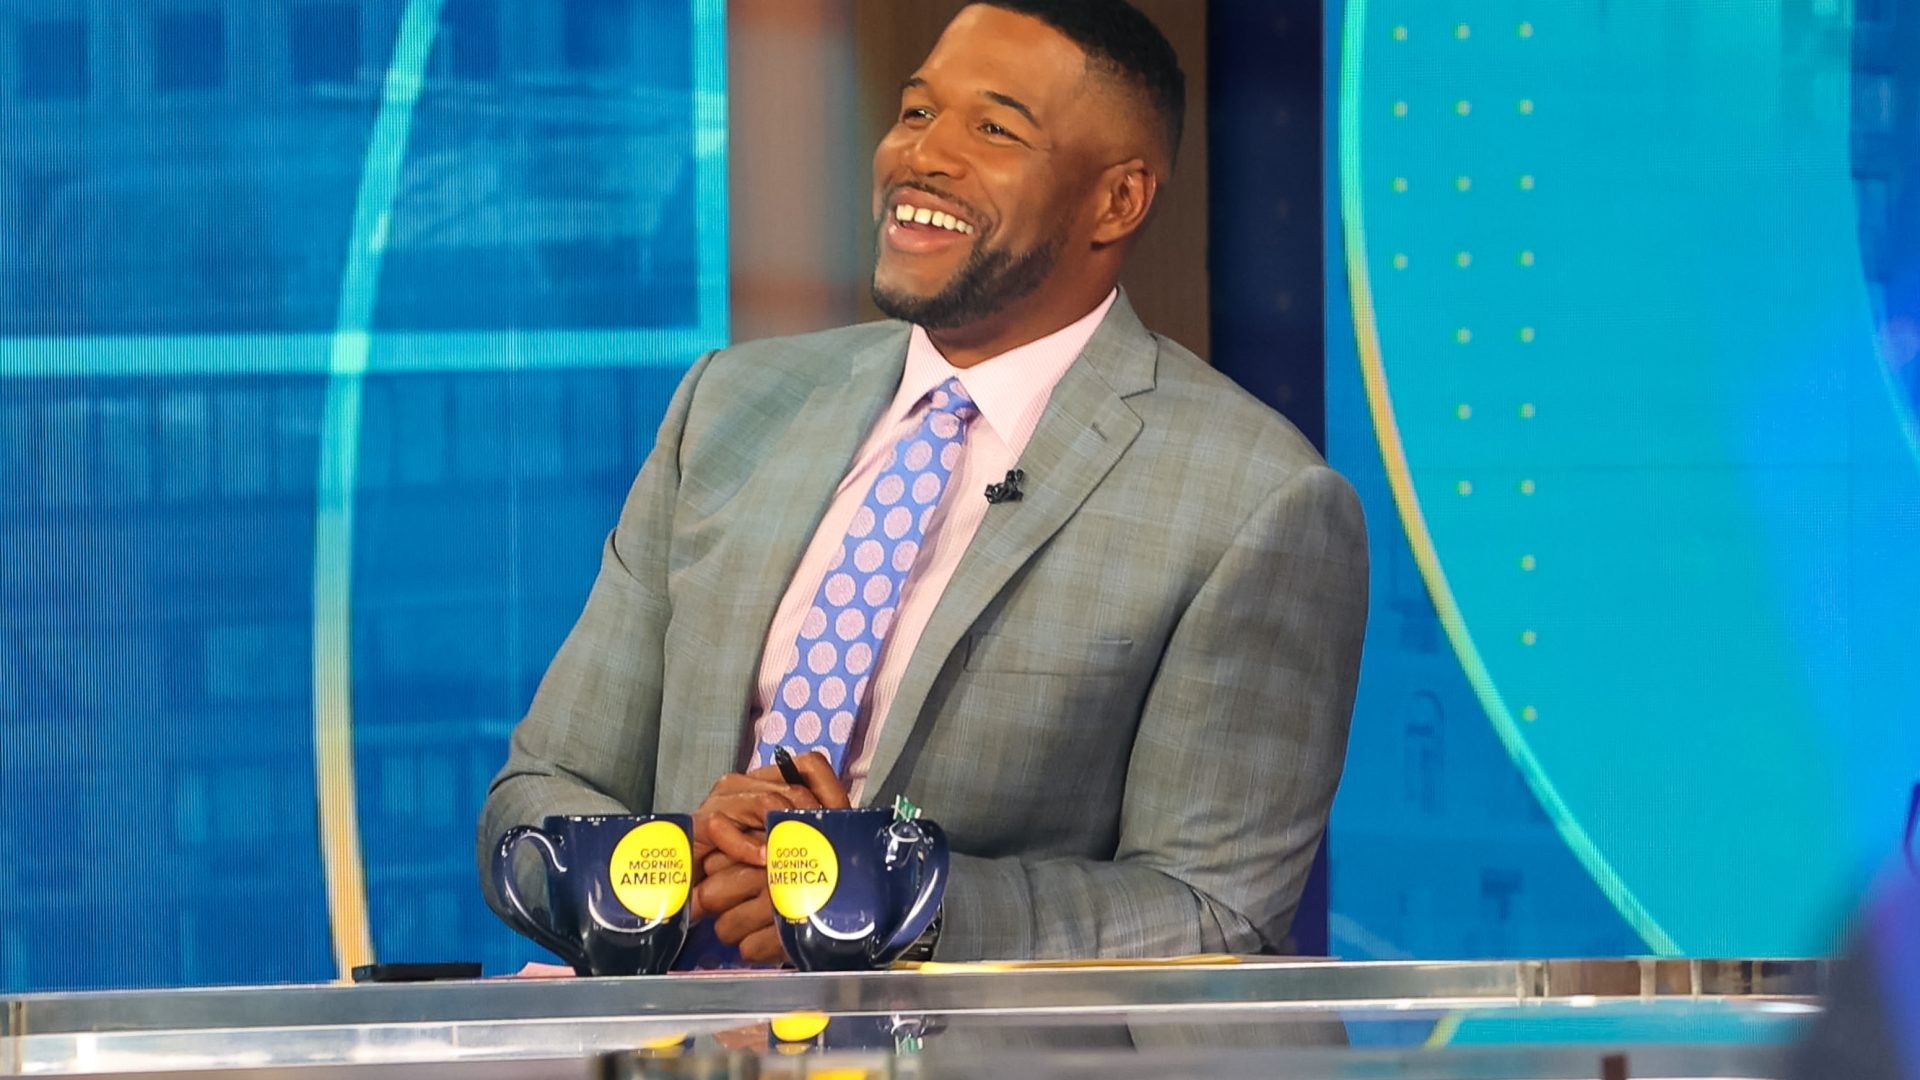 Michael Strahan Missing From 'Good Morning America' For Second Week In A Row Due To 'Personal Family Matters'